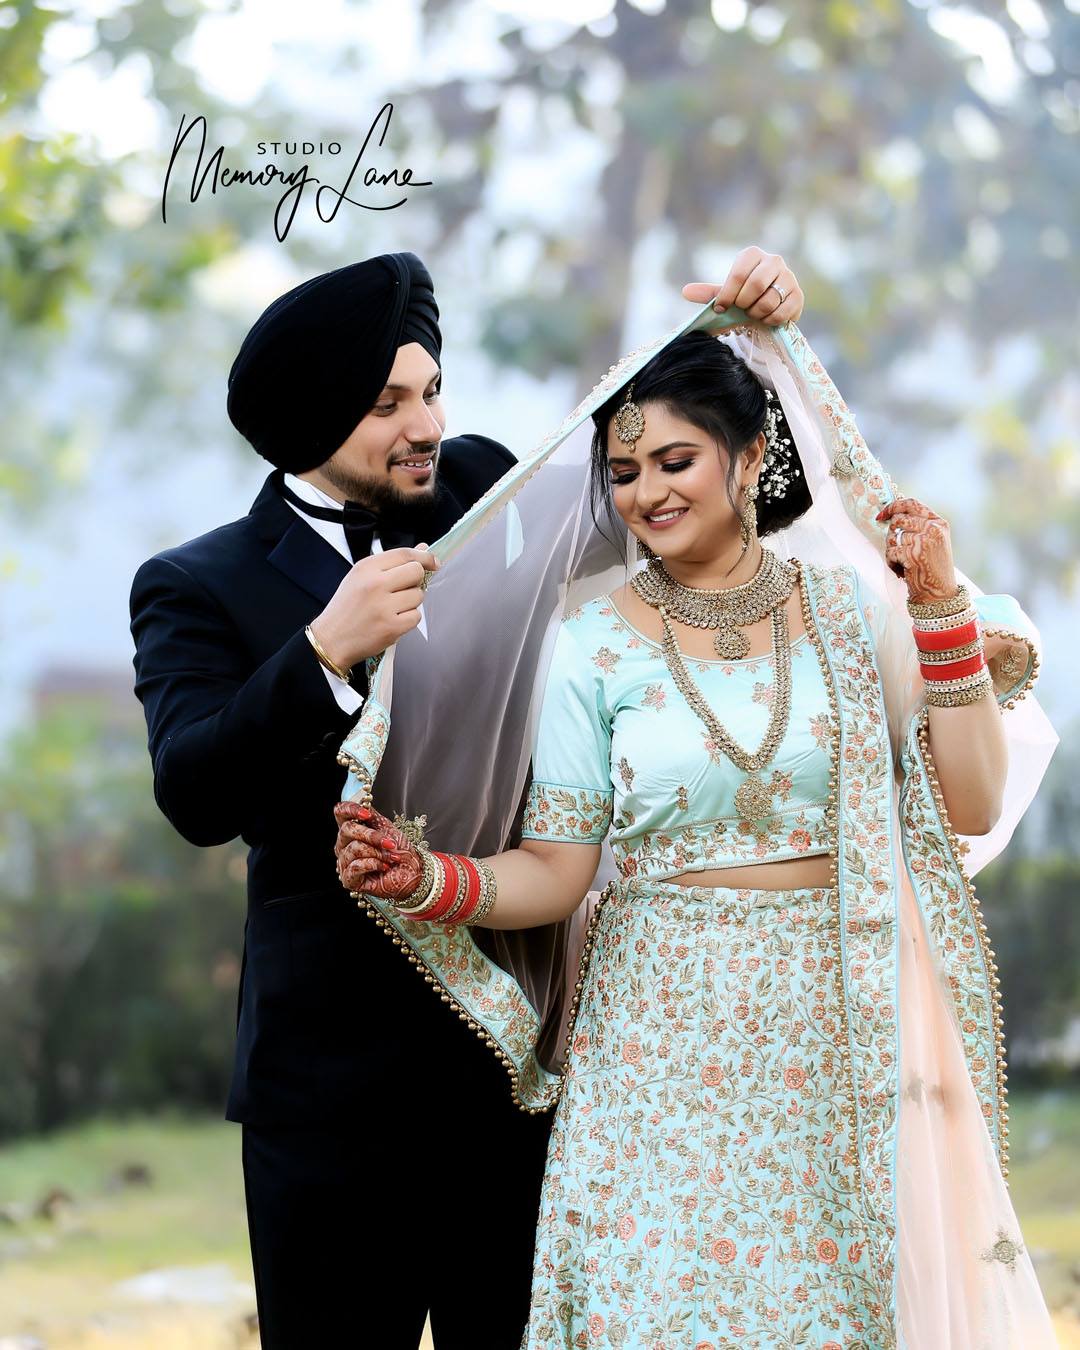 How to do perfect Candid Couple Photography? – Studio Memory Lane